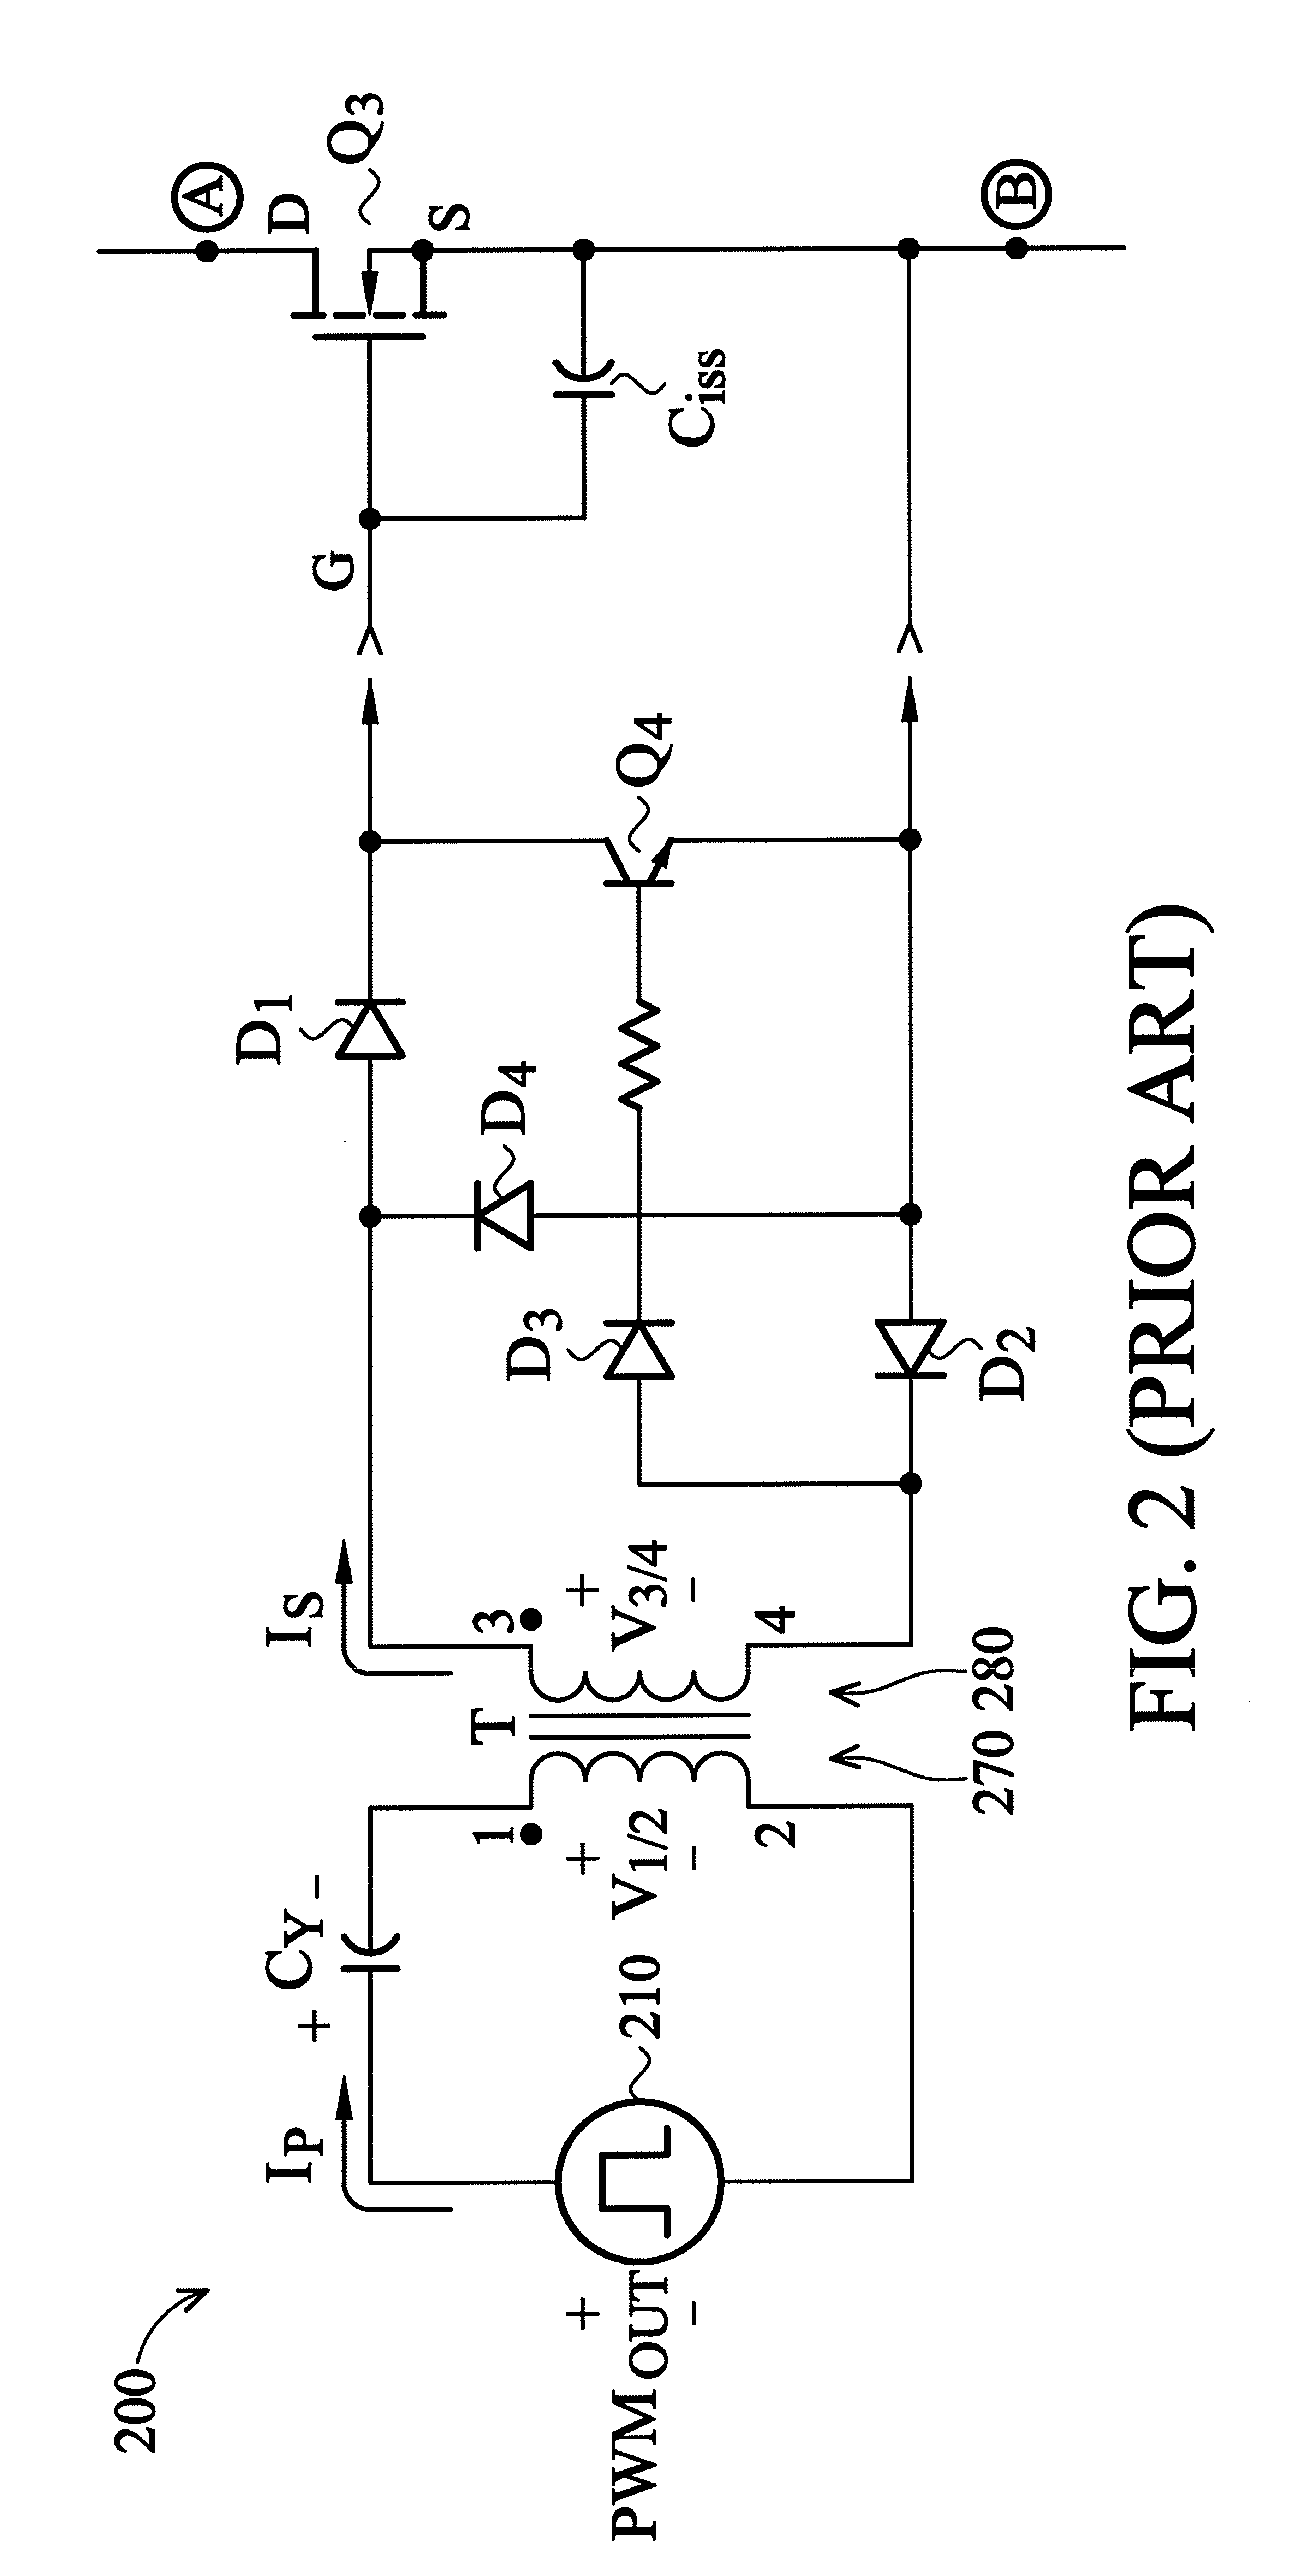 Driver for driving power switch element